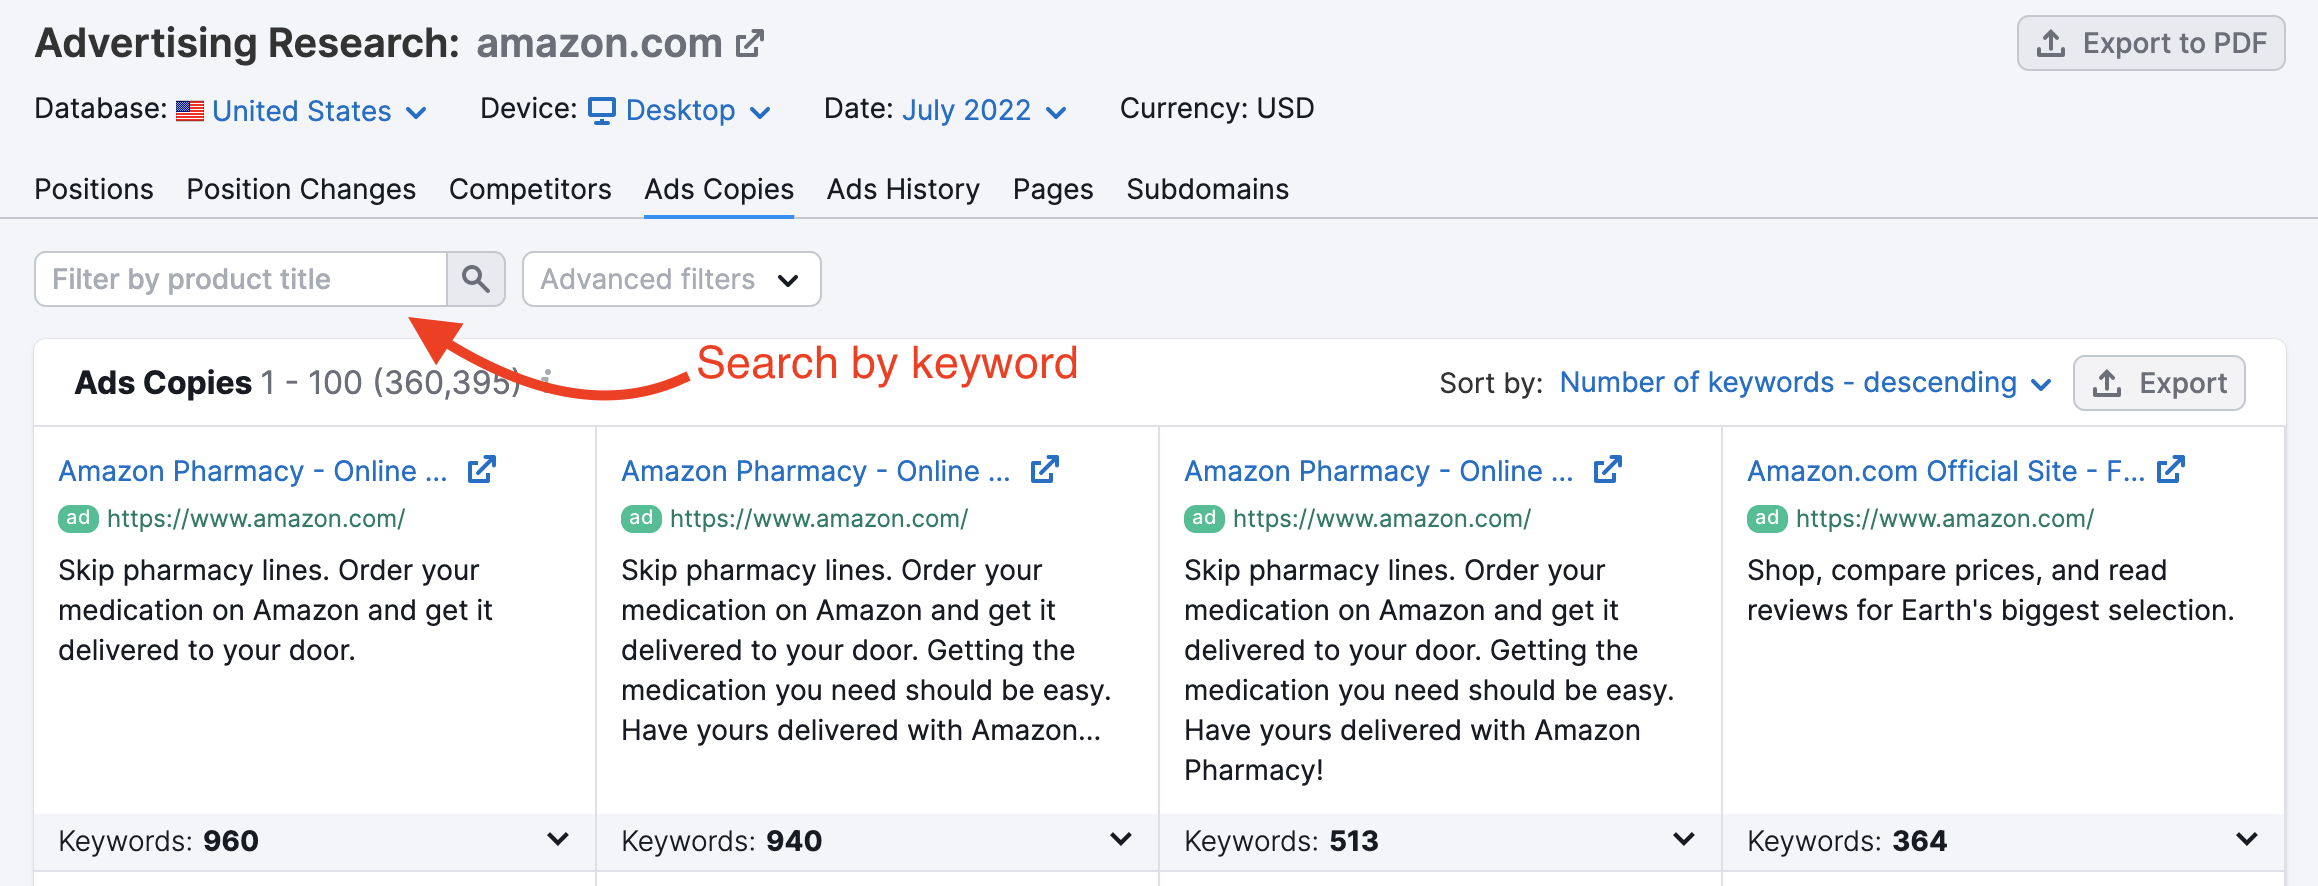 Advertising Research Ad Copies report. A red arrow points to the 'filter by product title' search bar. The red arrow is labeled as 'search by keyword'. 